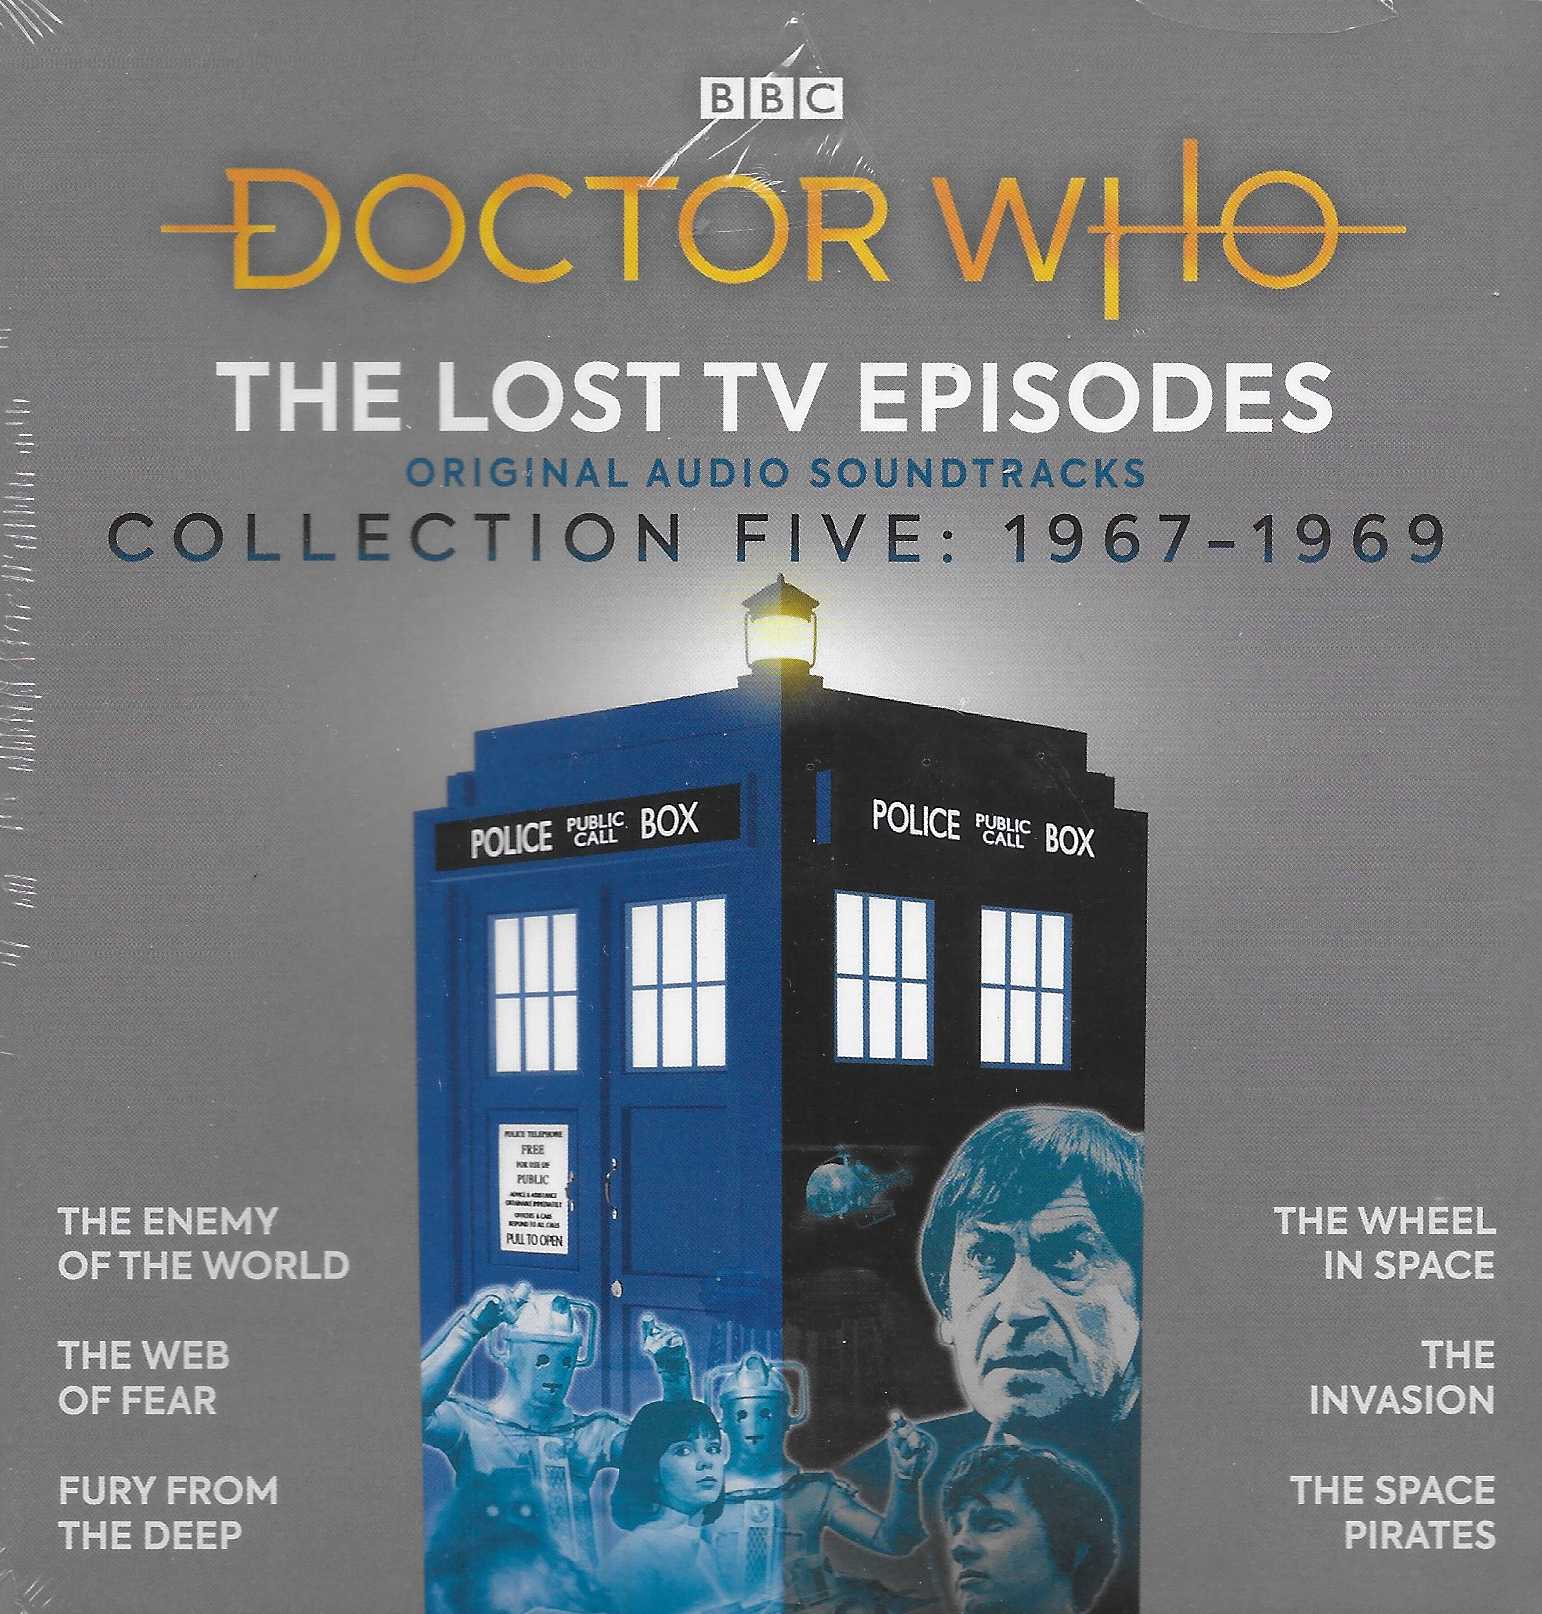 Picture of ISBN 978-1-52913-828-3 Doctor Who - The lost TV episodes - Collection five: 1967-1969 by artist Various from the BBC records and Tapes library